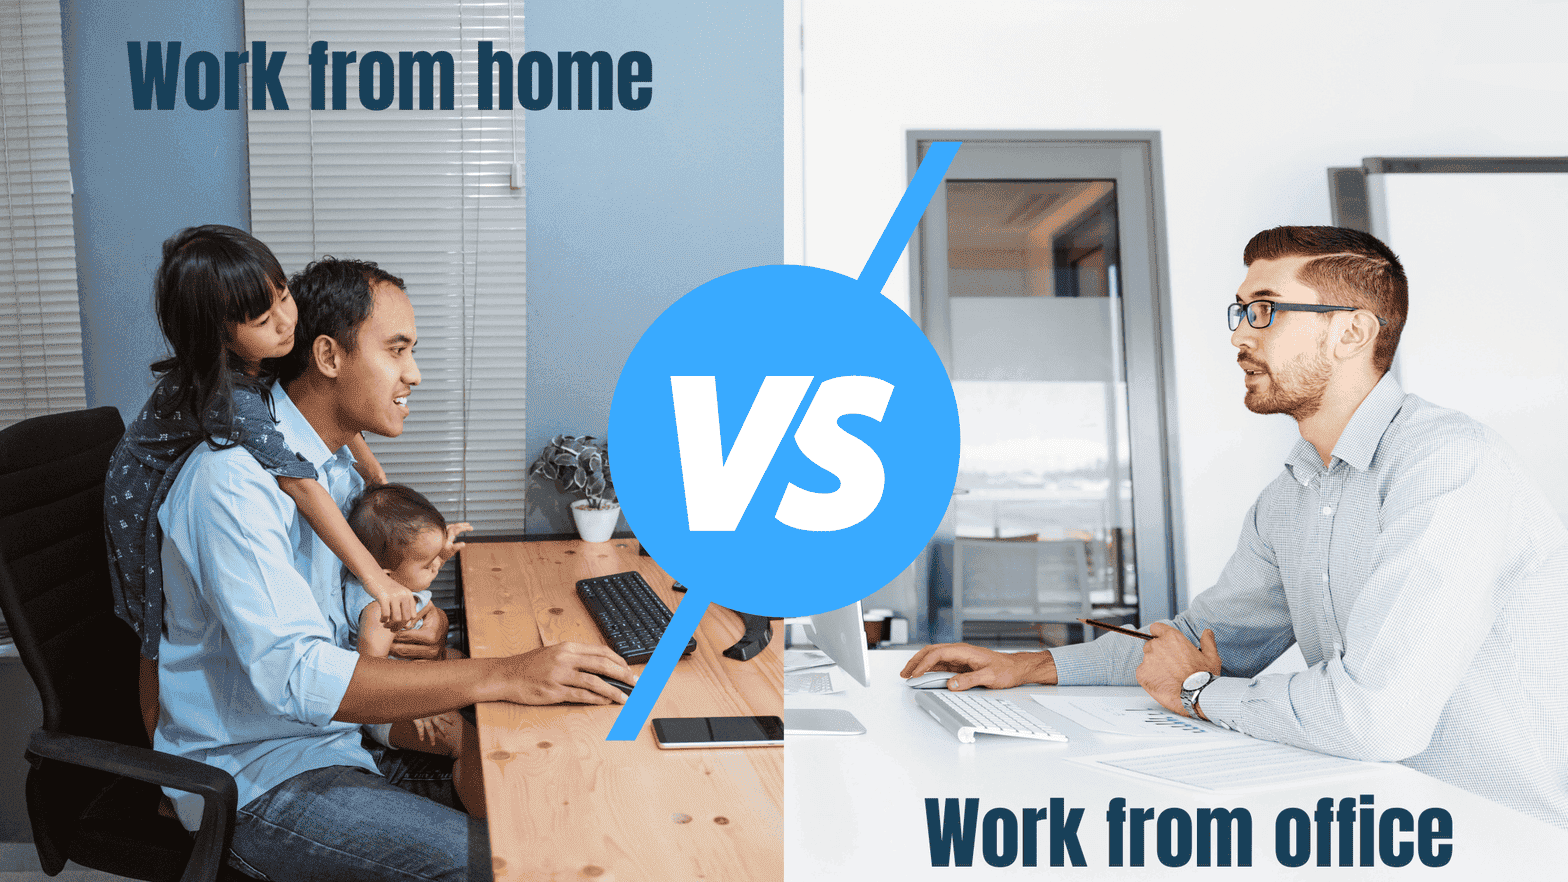 Should I work from home or go to office